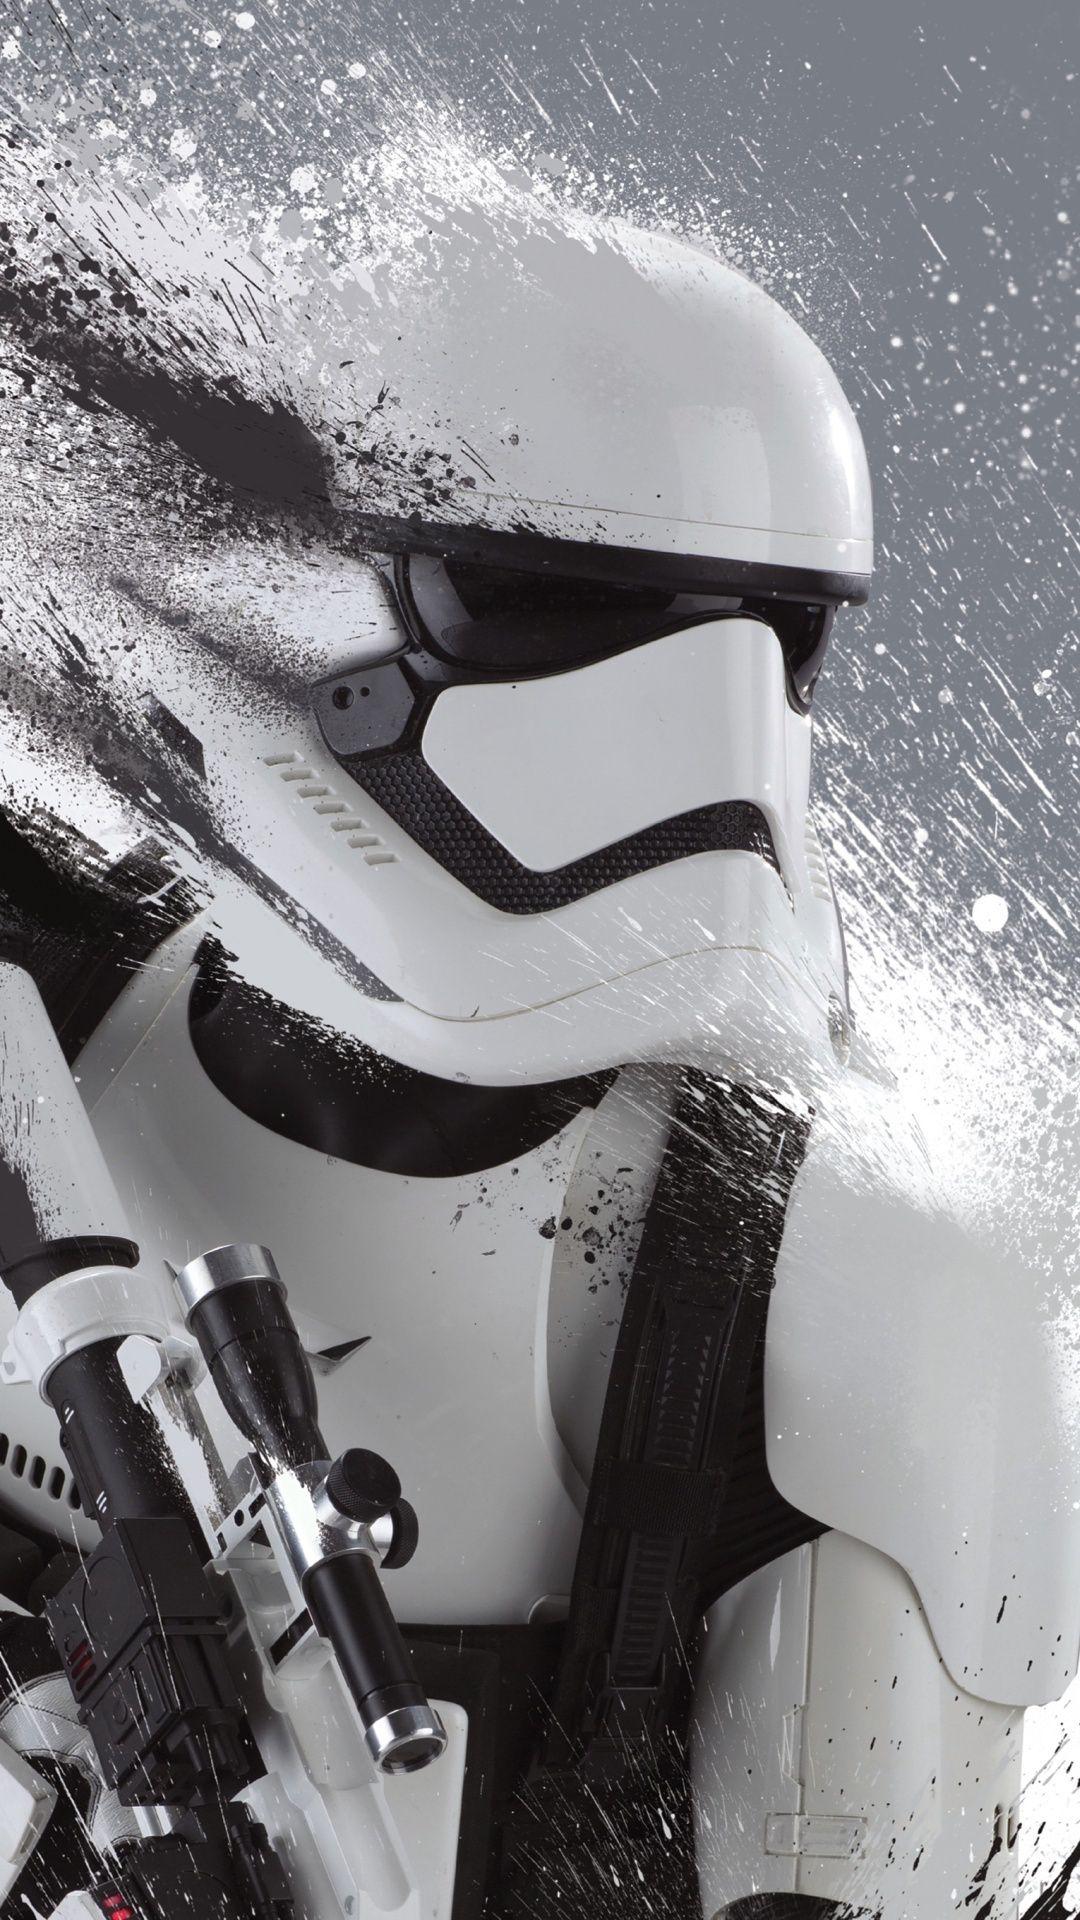 With these mobile wallpaper, the force will be with you